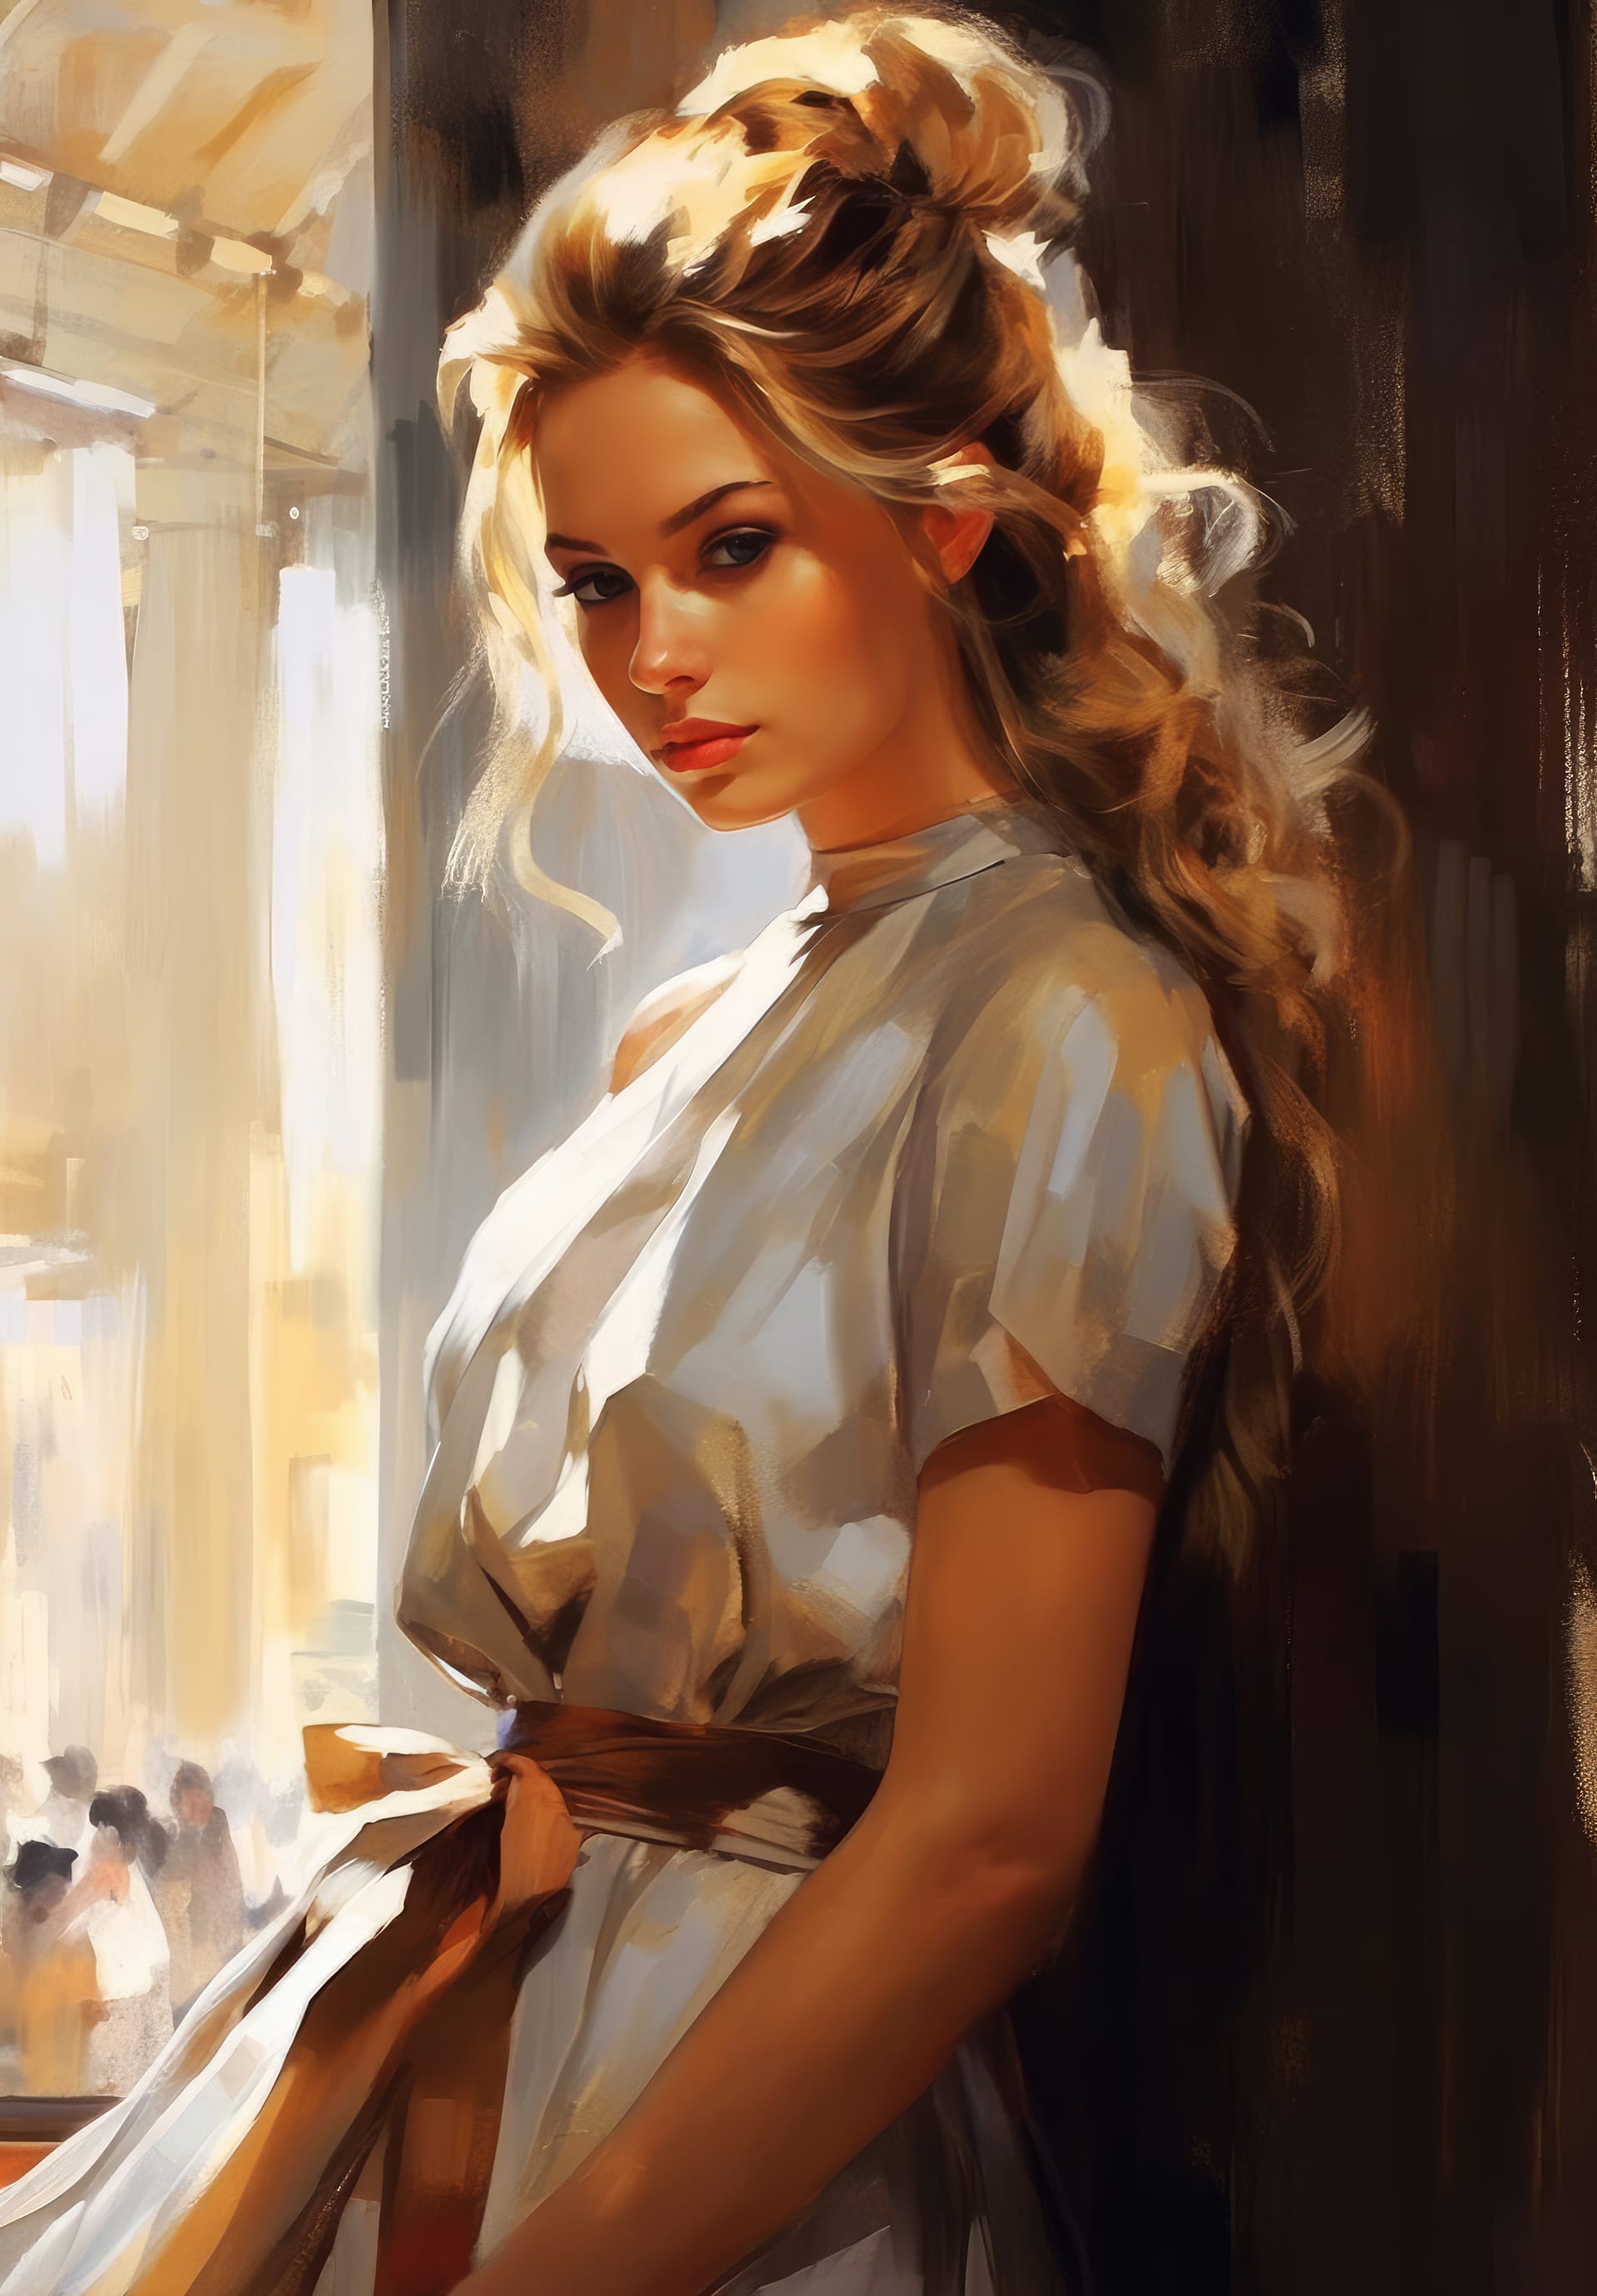 Painting woman with long blonde hair white dress